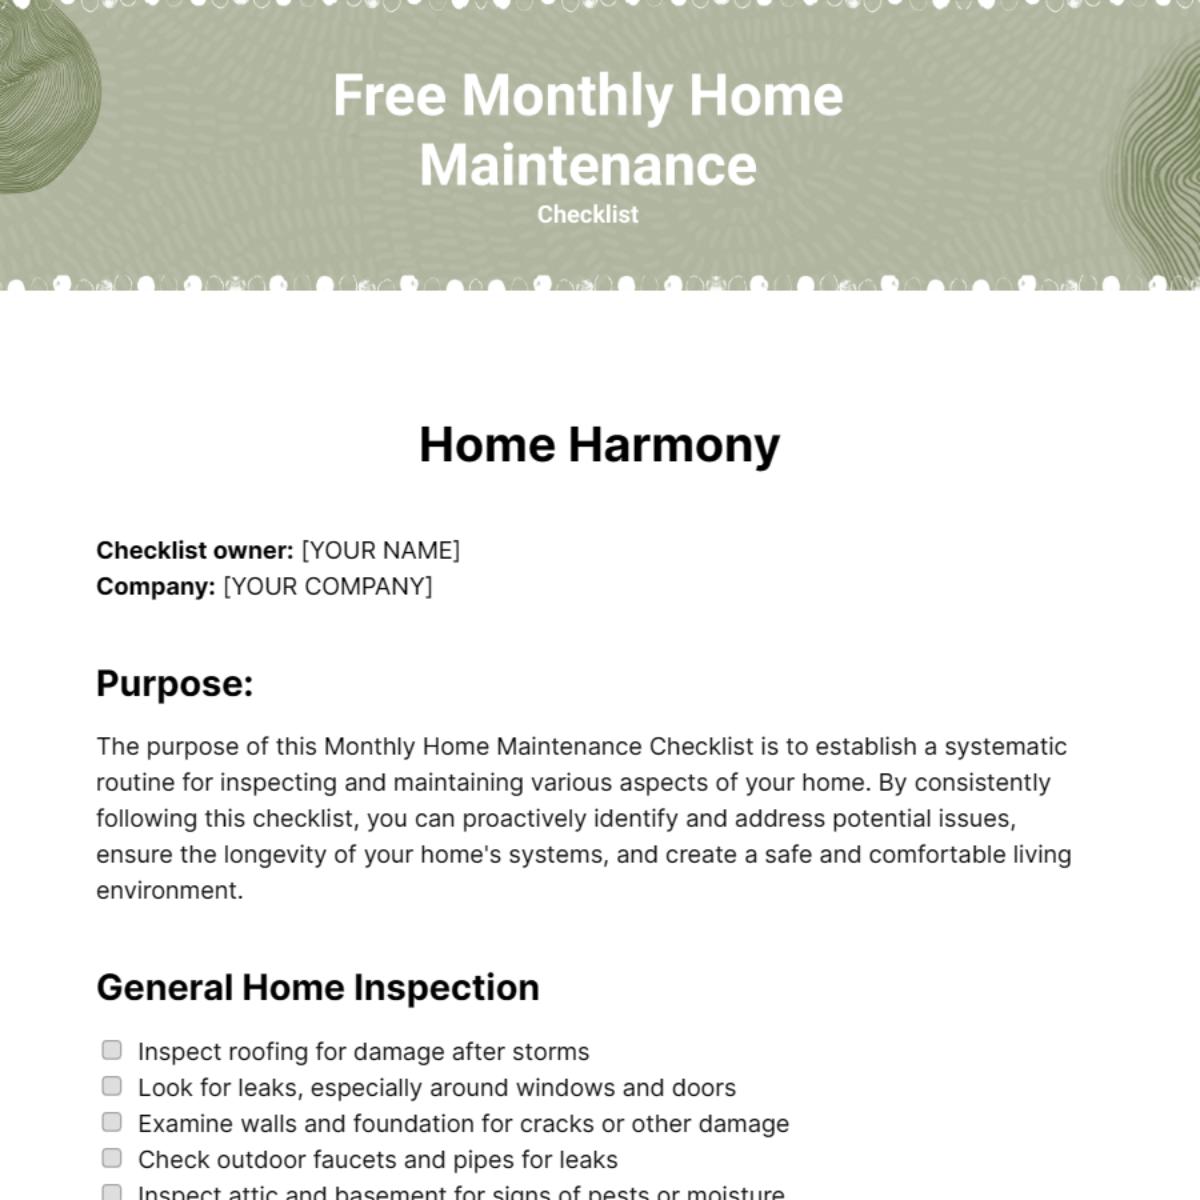 Free Monthly Home Maintenance Checklist Template